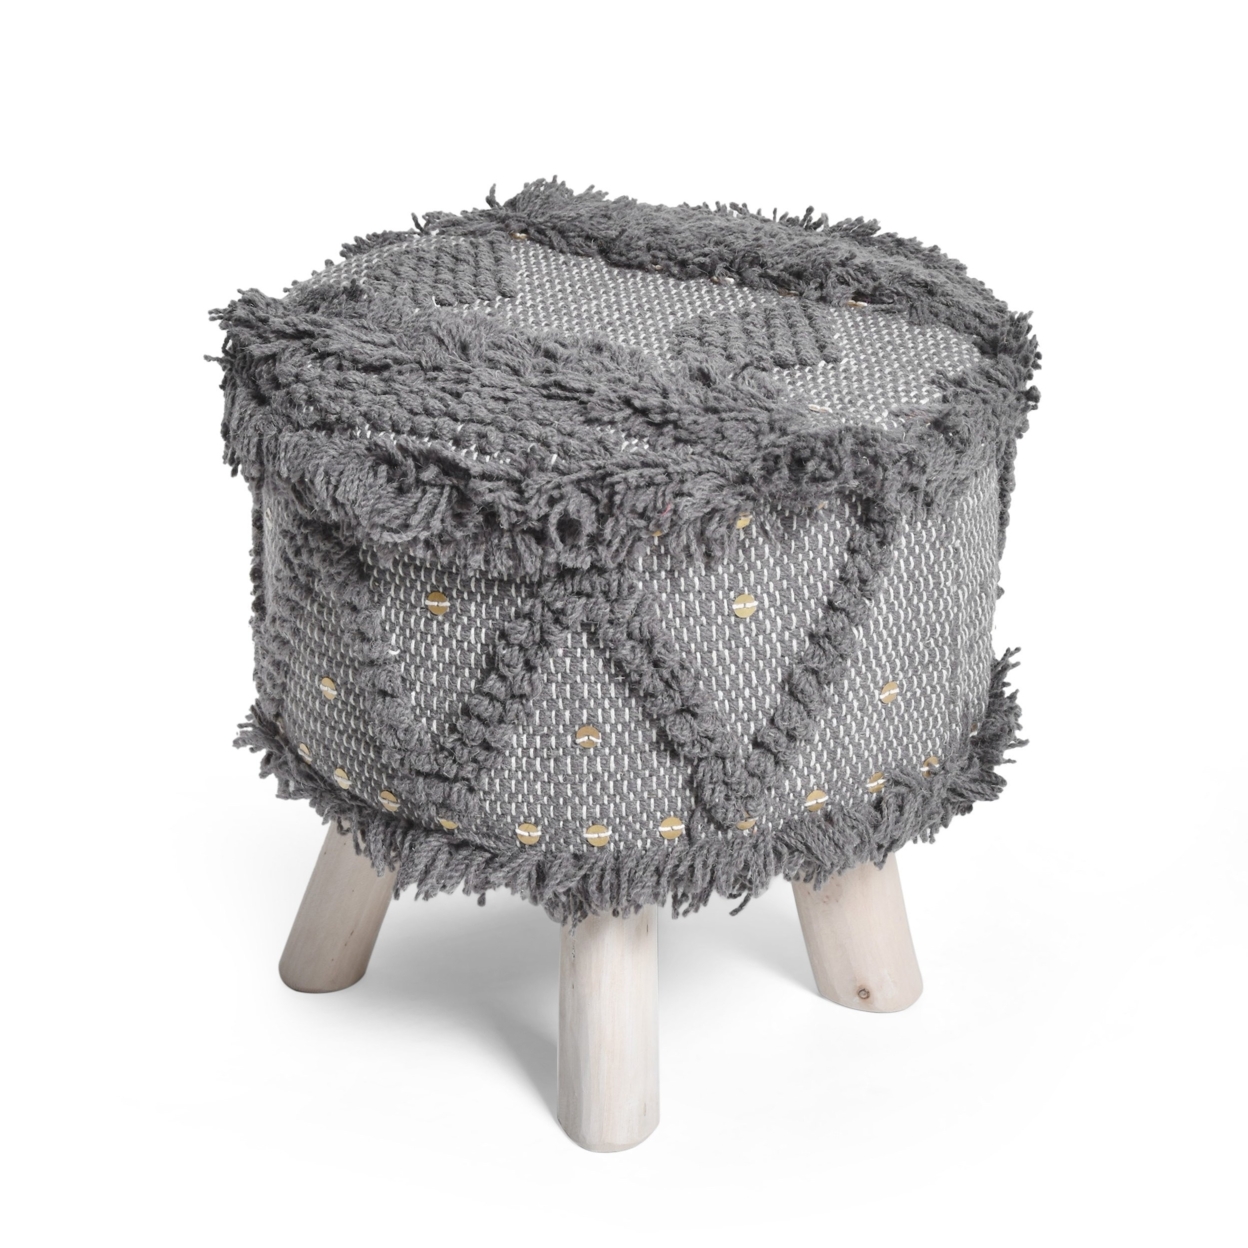 Edene Handcrafted Boho Fabric Stool With Metal Accents - Dark Brown